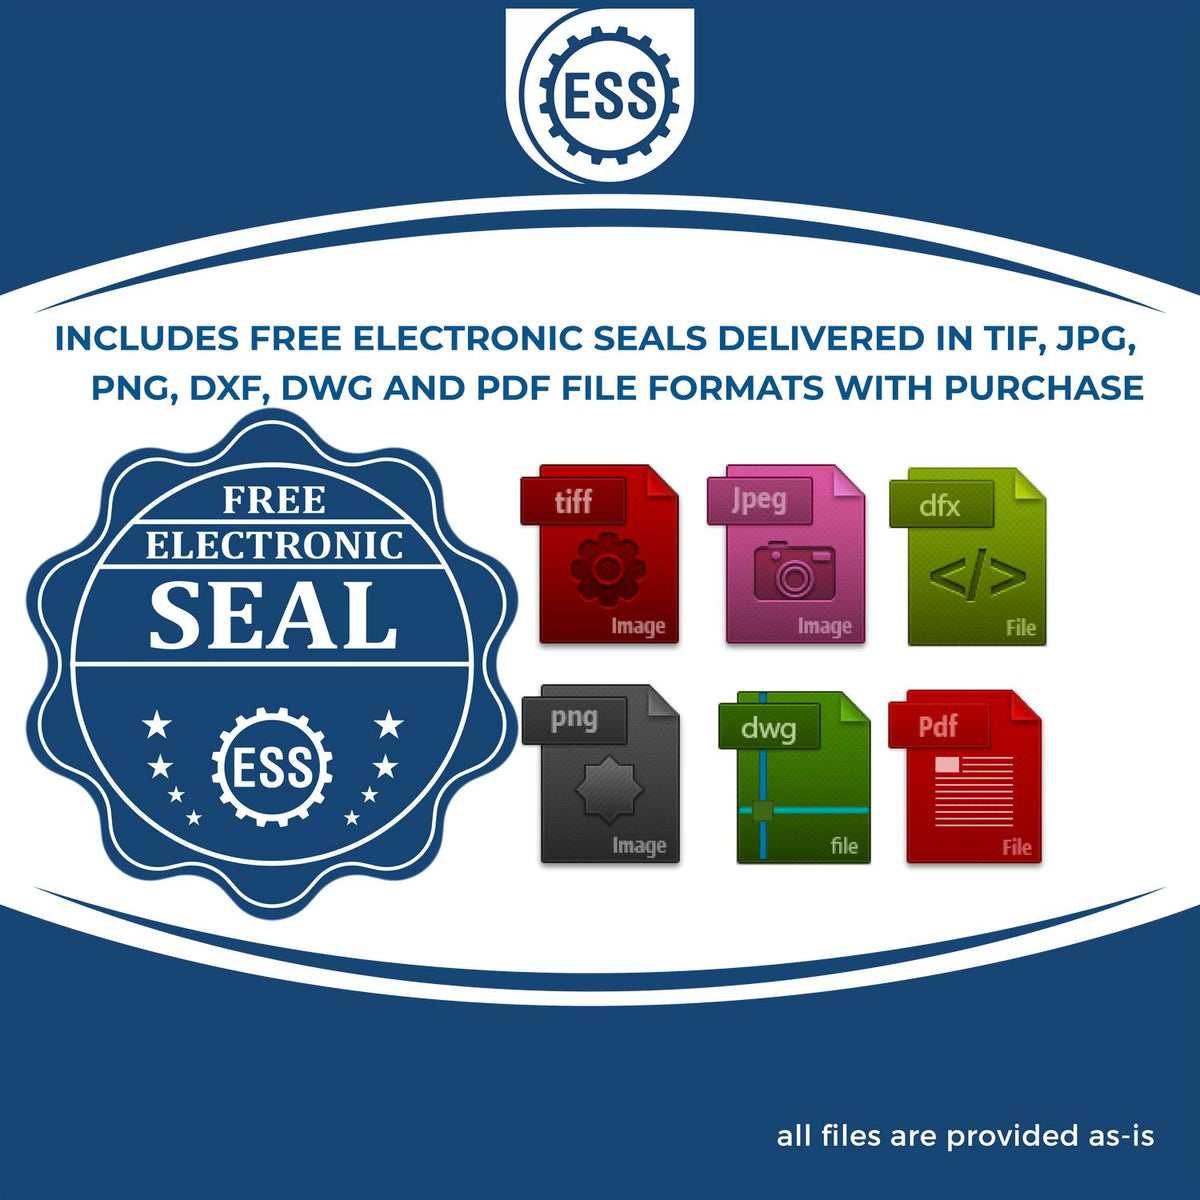 An infographic for the free electronic seal for the Long Reach Wyoming PE Seal illustrating the different file type icons such as DXF, DWG, TIF, JPG and PNG.